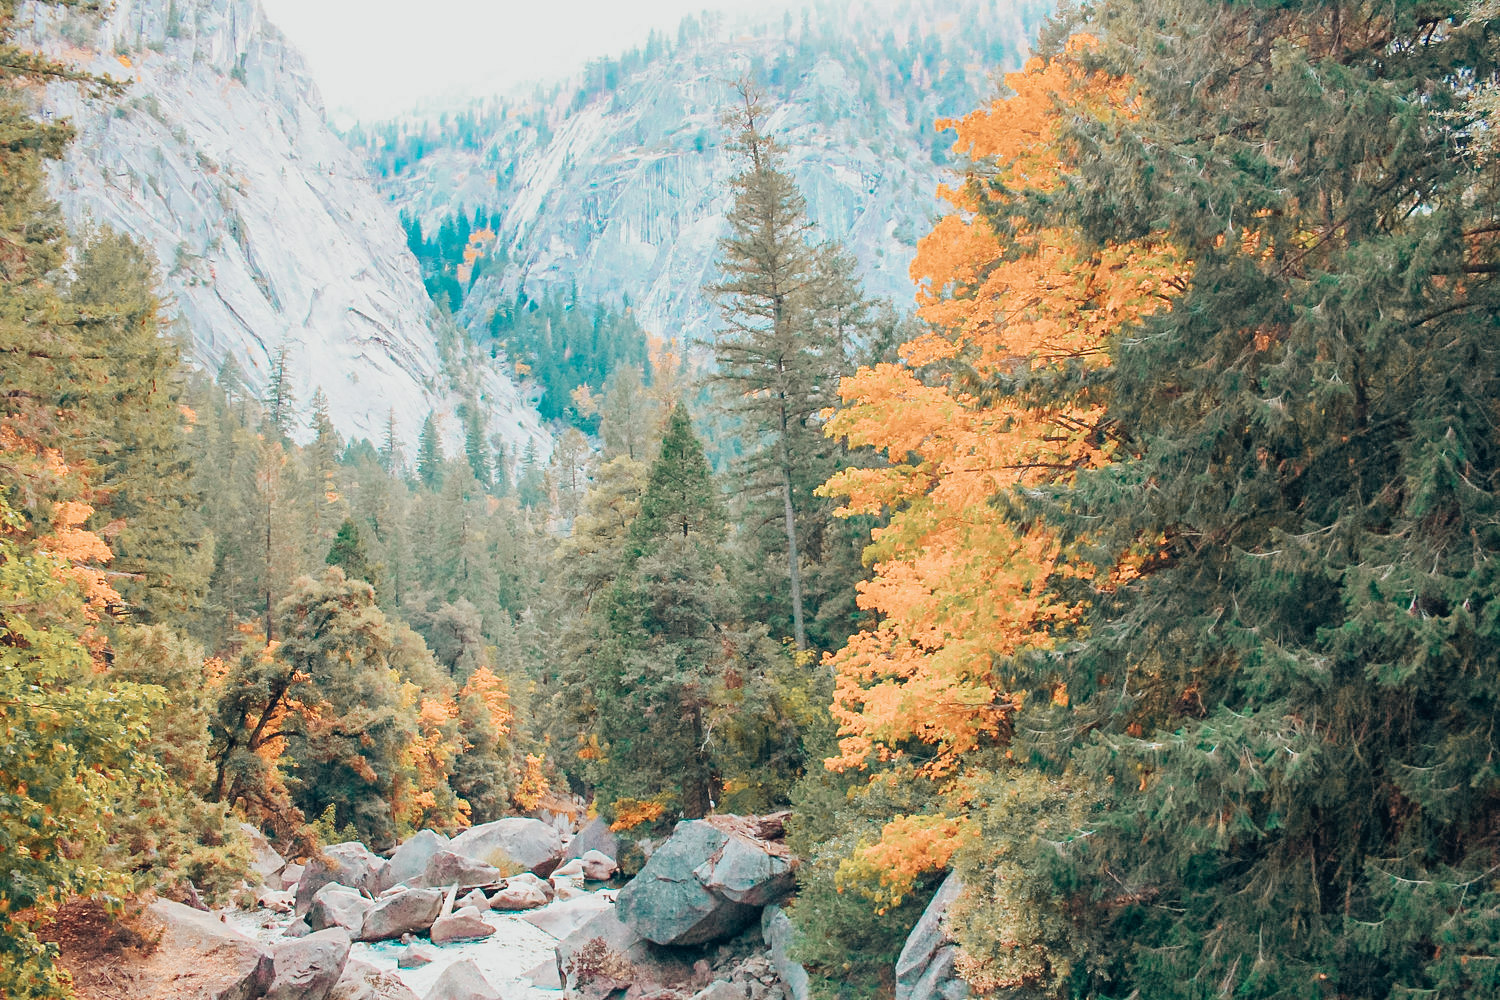 Yosemite National Park in the Fall